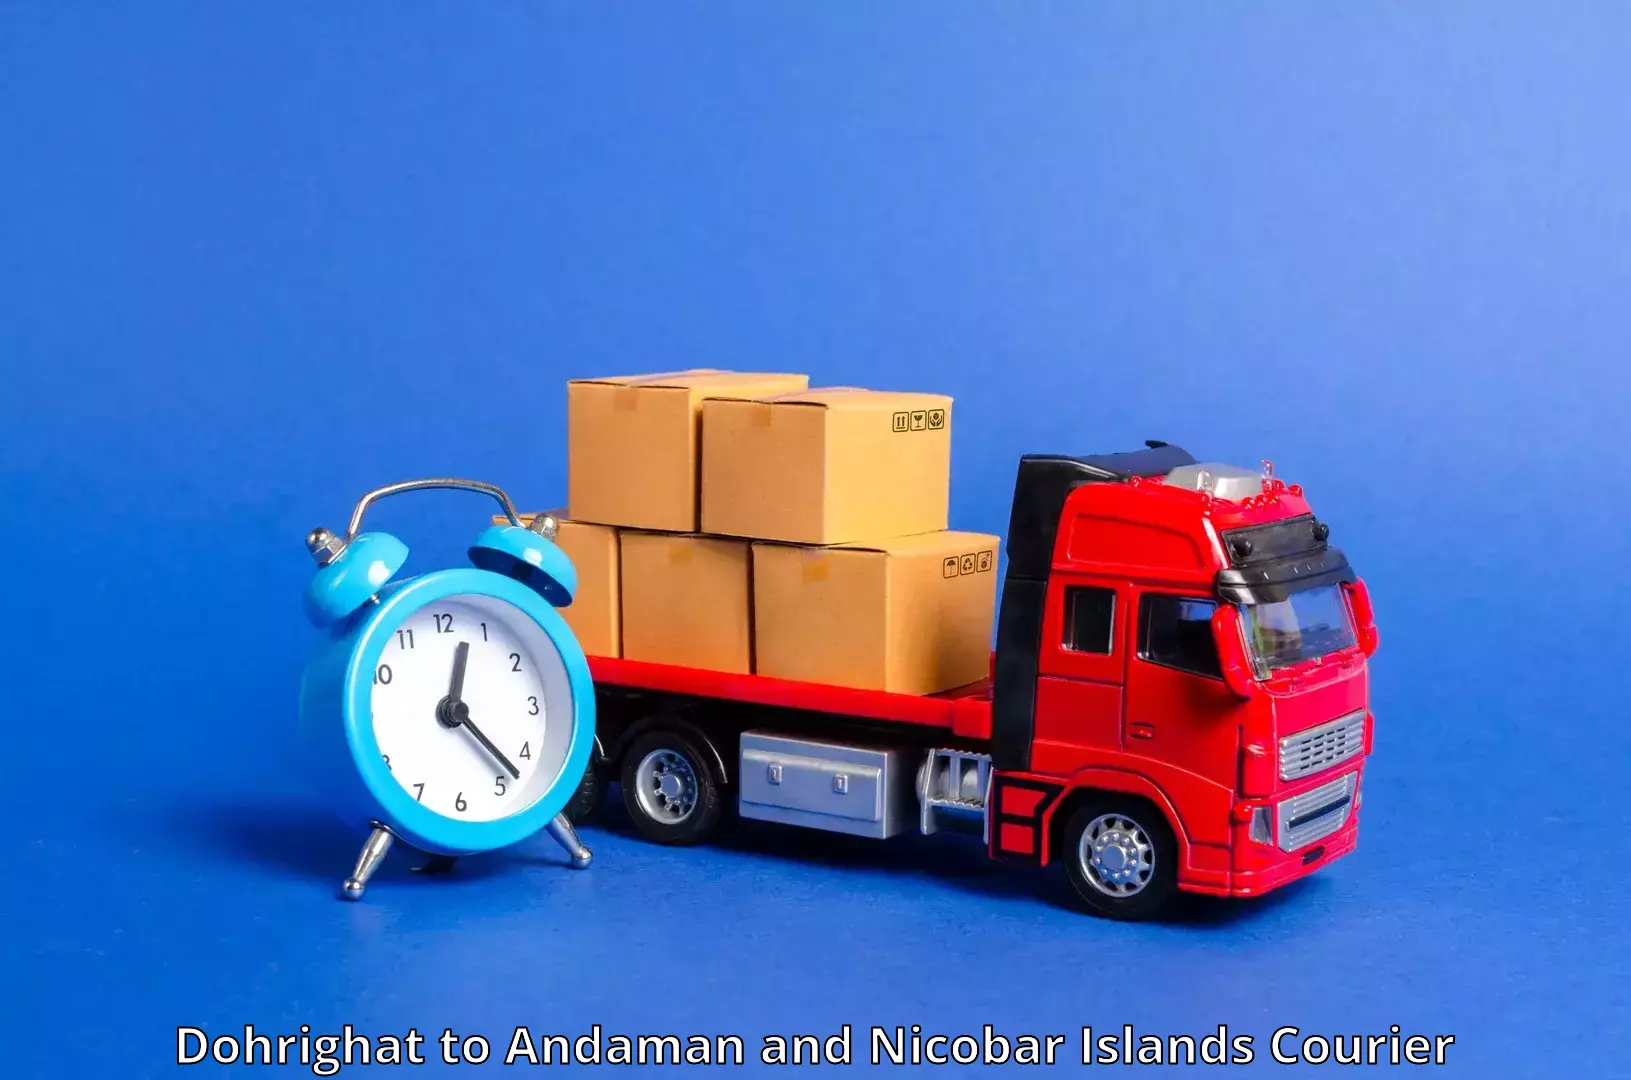 24/7 courier service Dohrighat to South Andaman